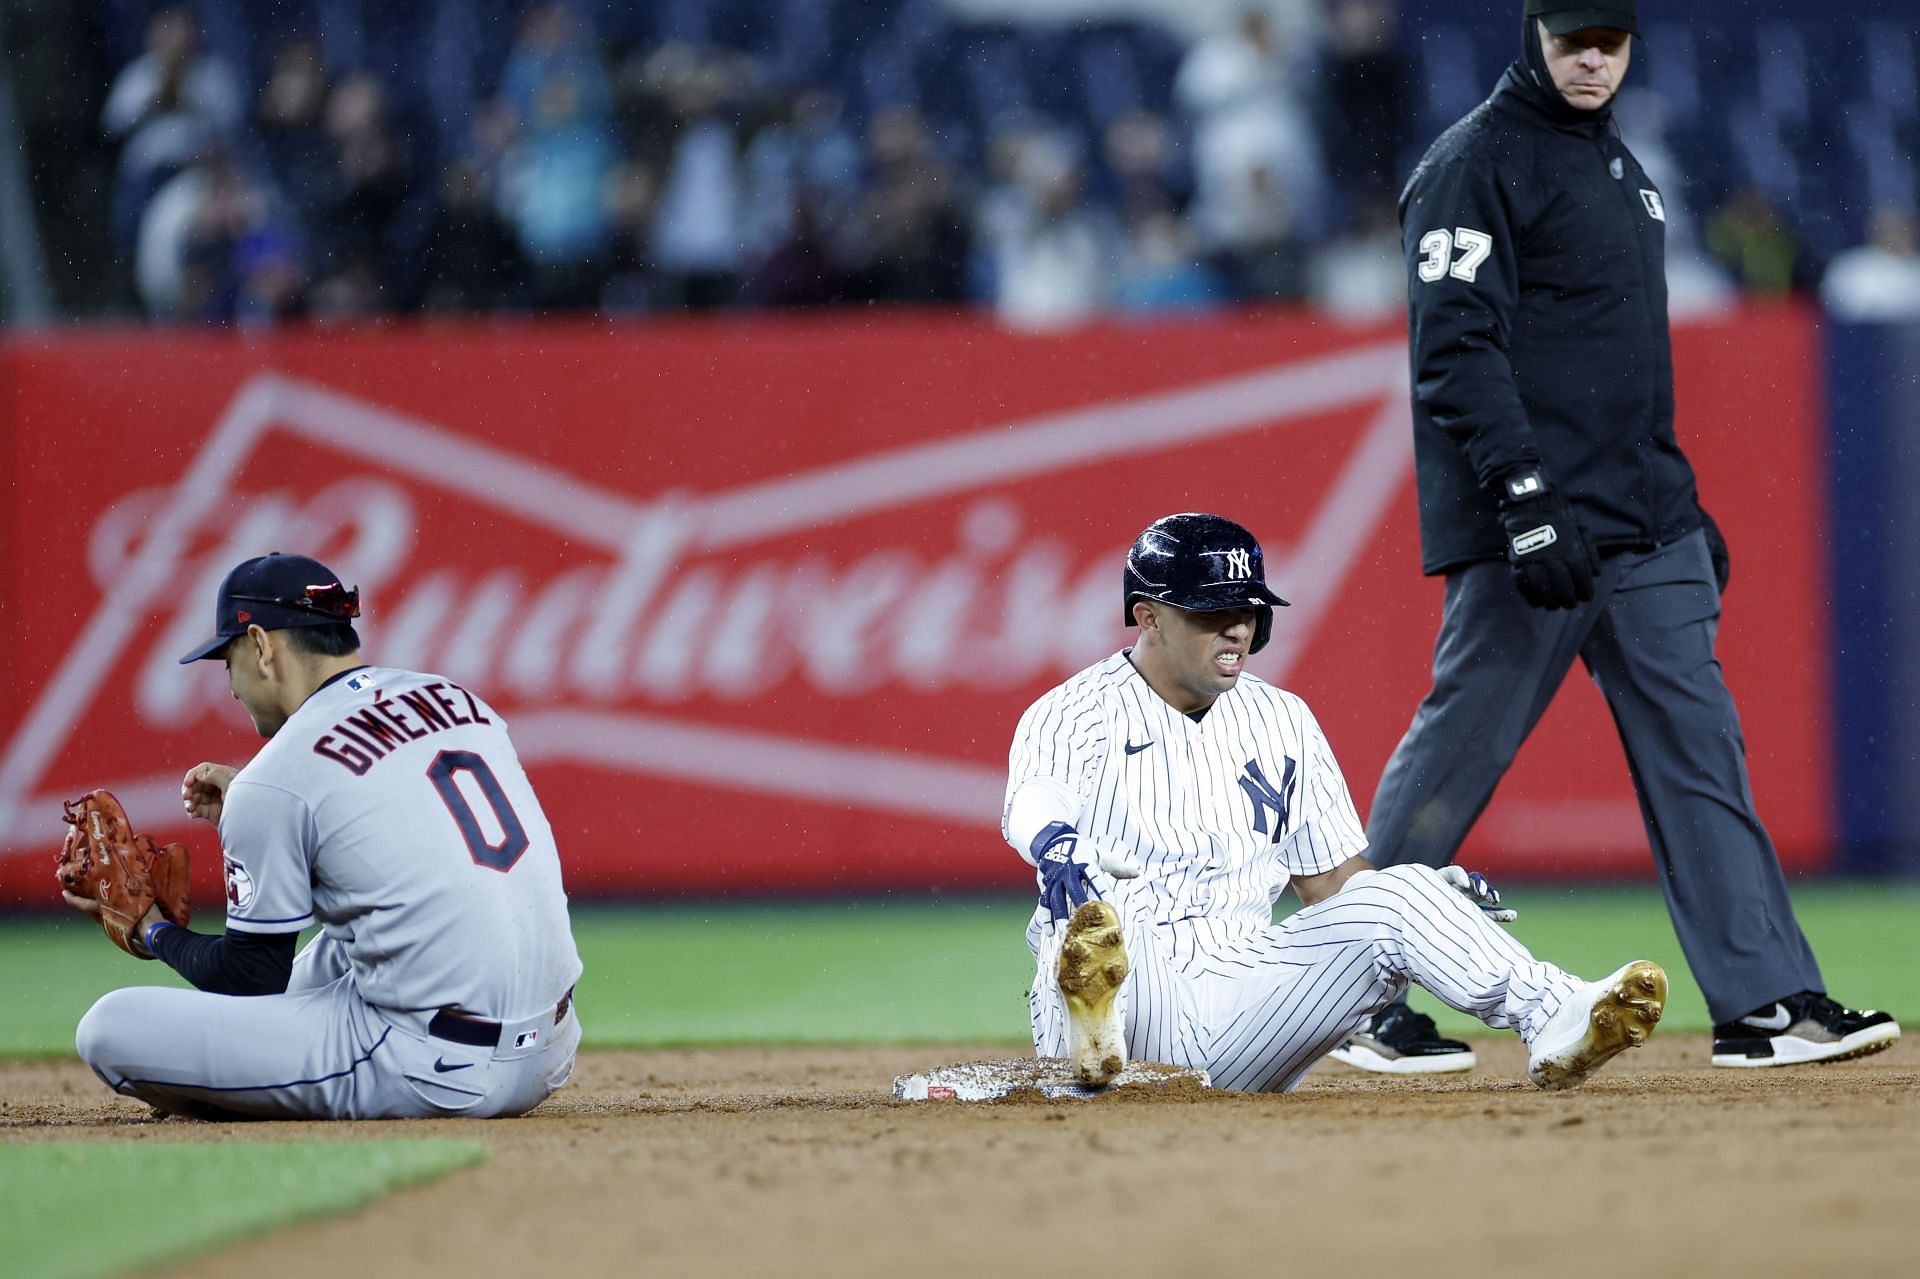 Oswald Peraza #91 of the New York Yankees and Andres Gimenez #0 of the Cleveland Guardians react after a play at second base during the ninth inning at Yankee Stadium